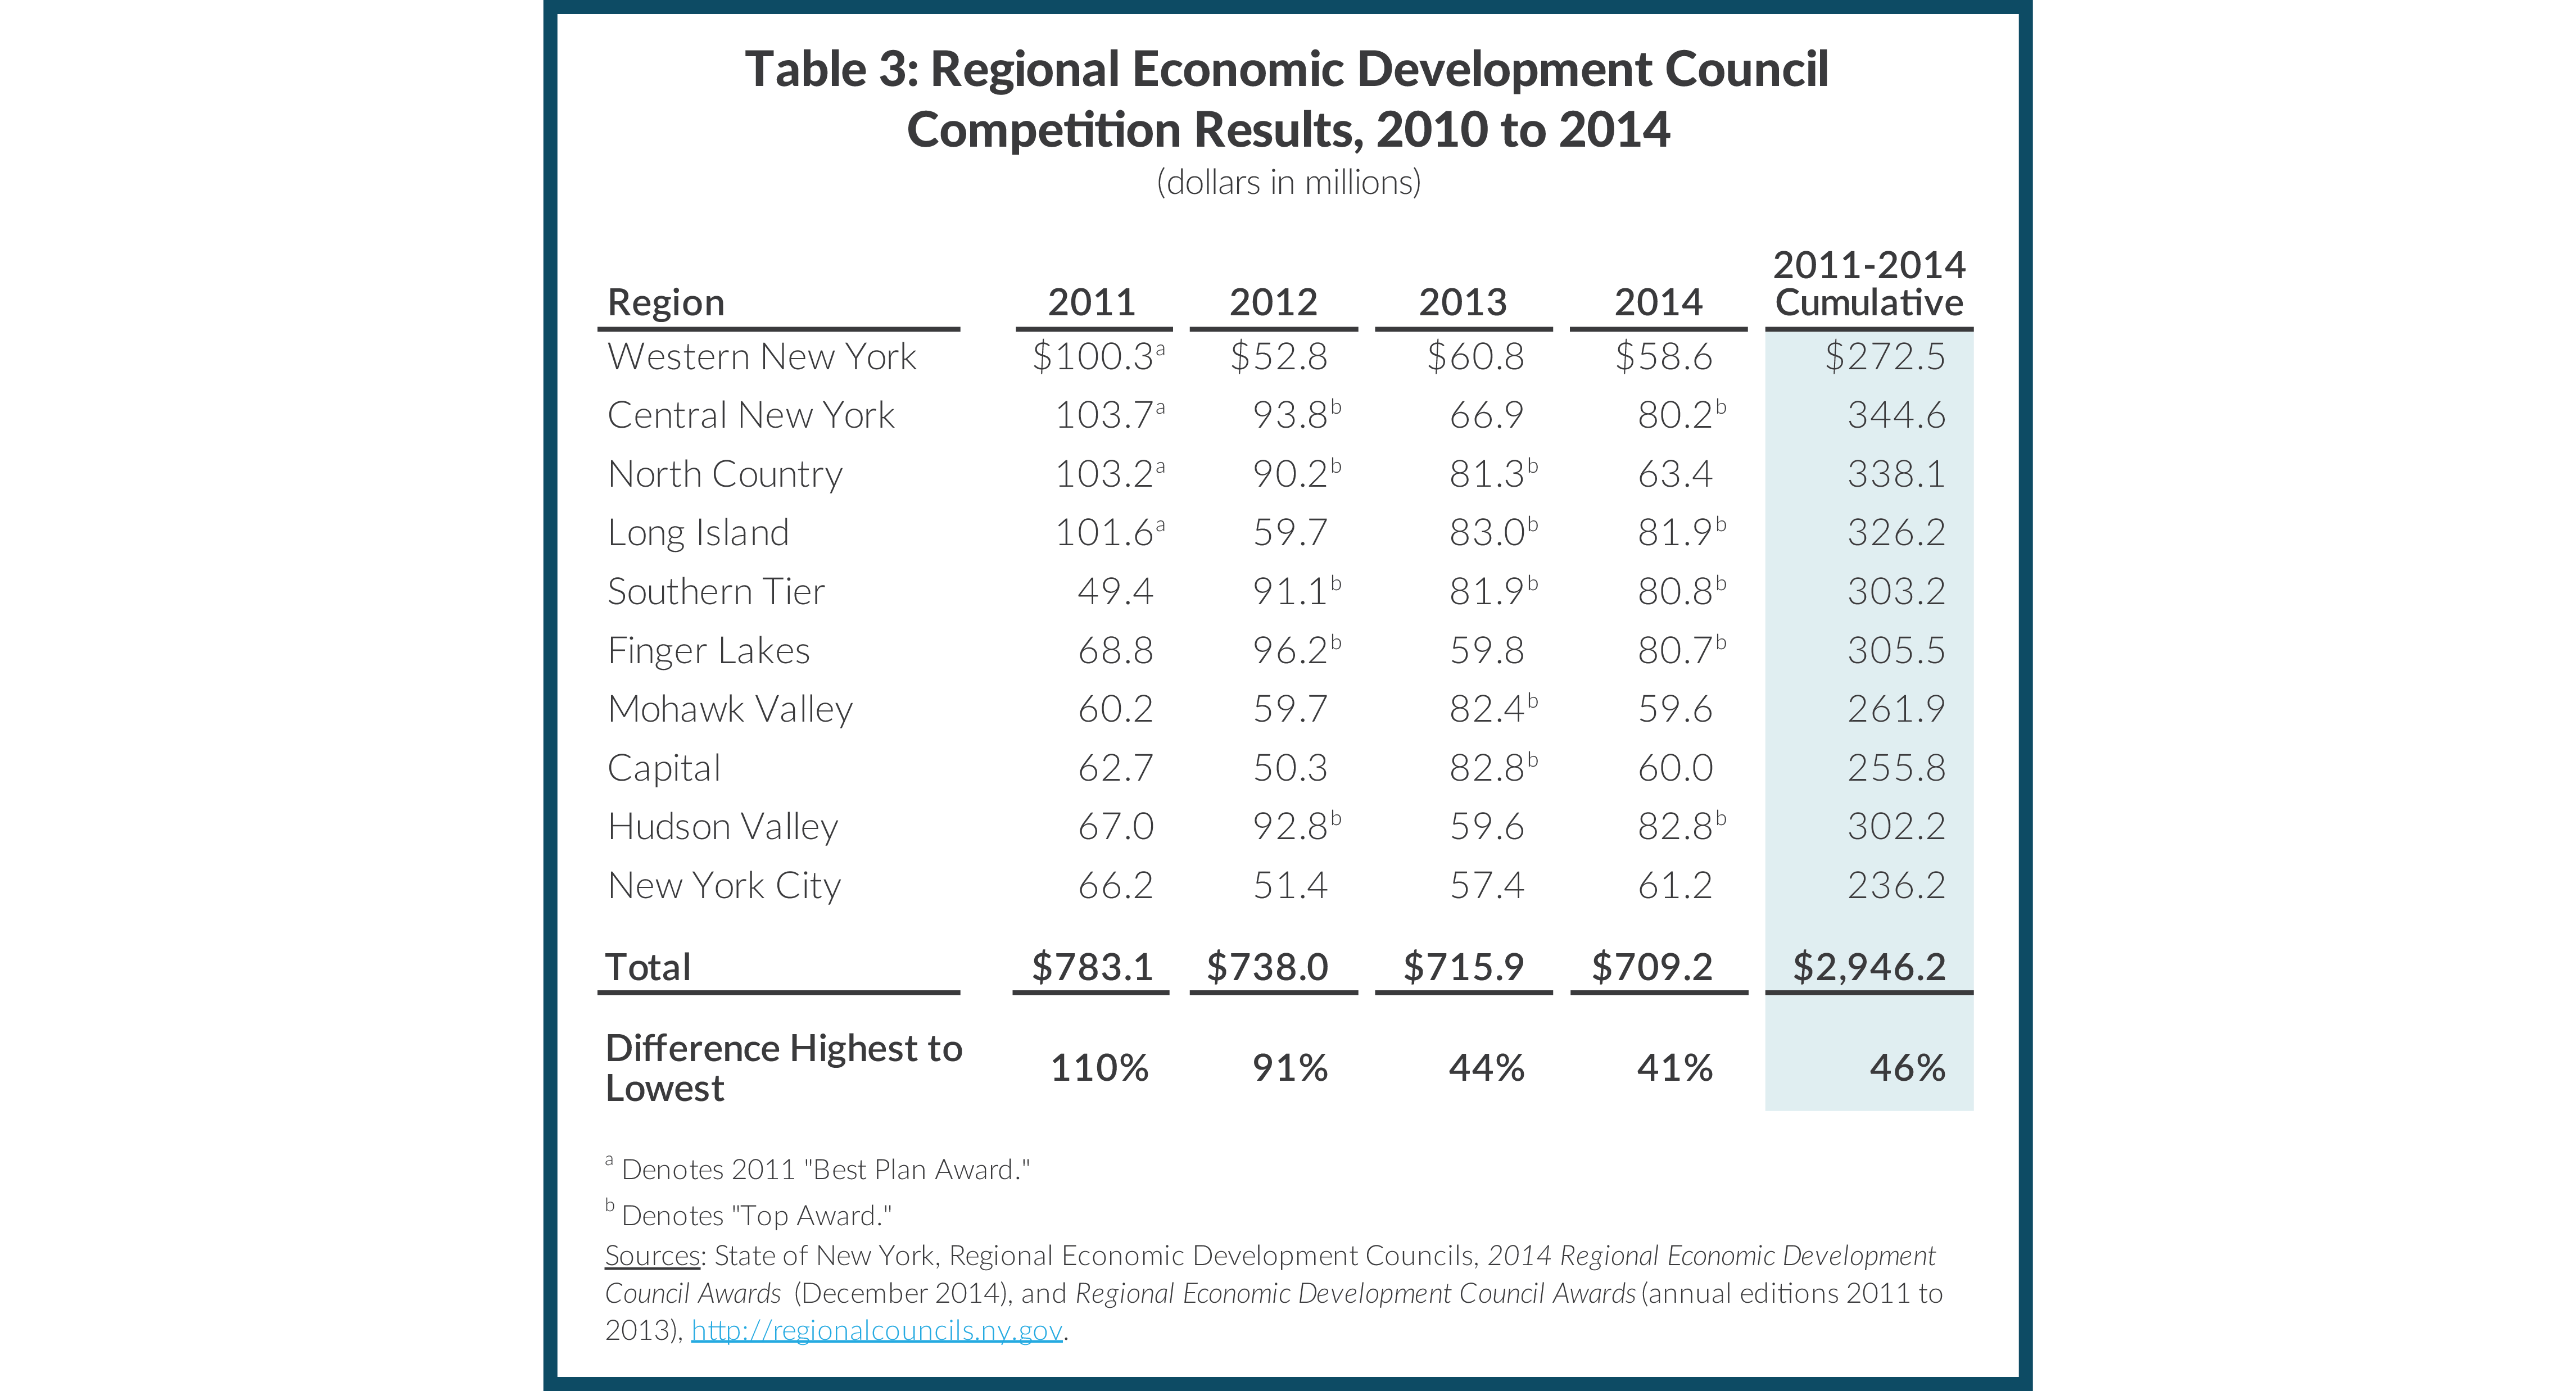 Table 3: Regional Economic Development Council Competition Results, 2010 to 2014